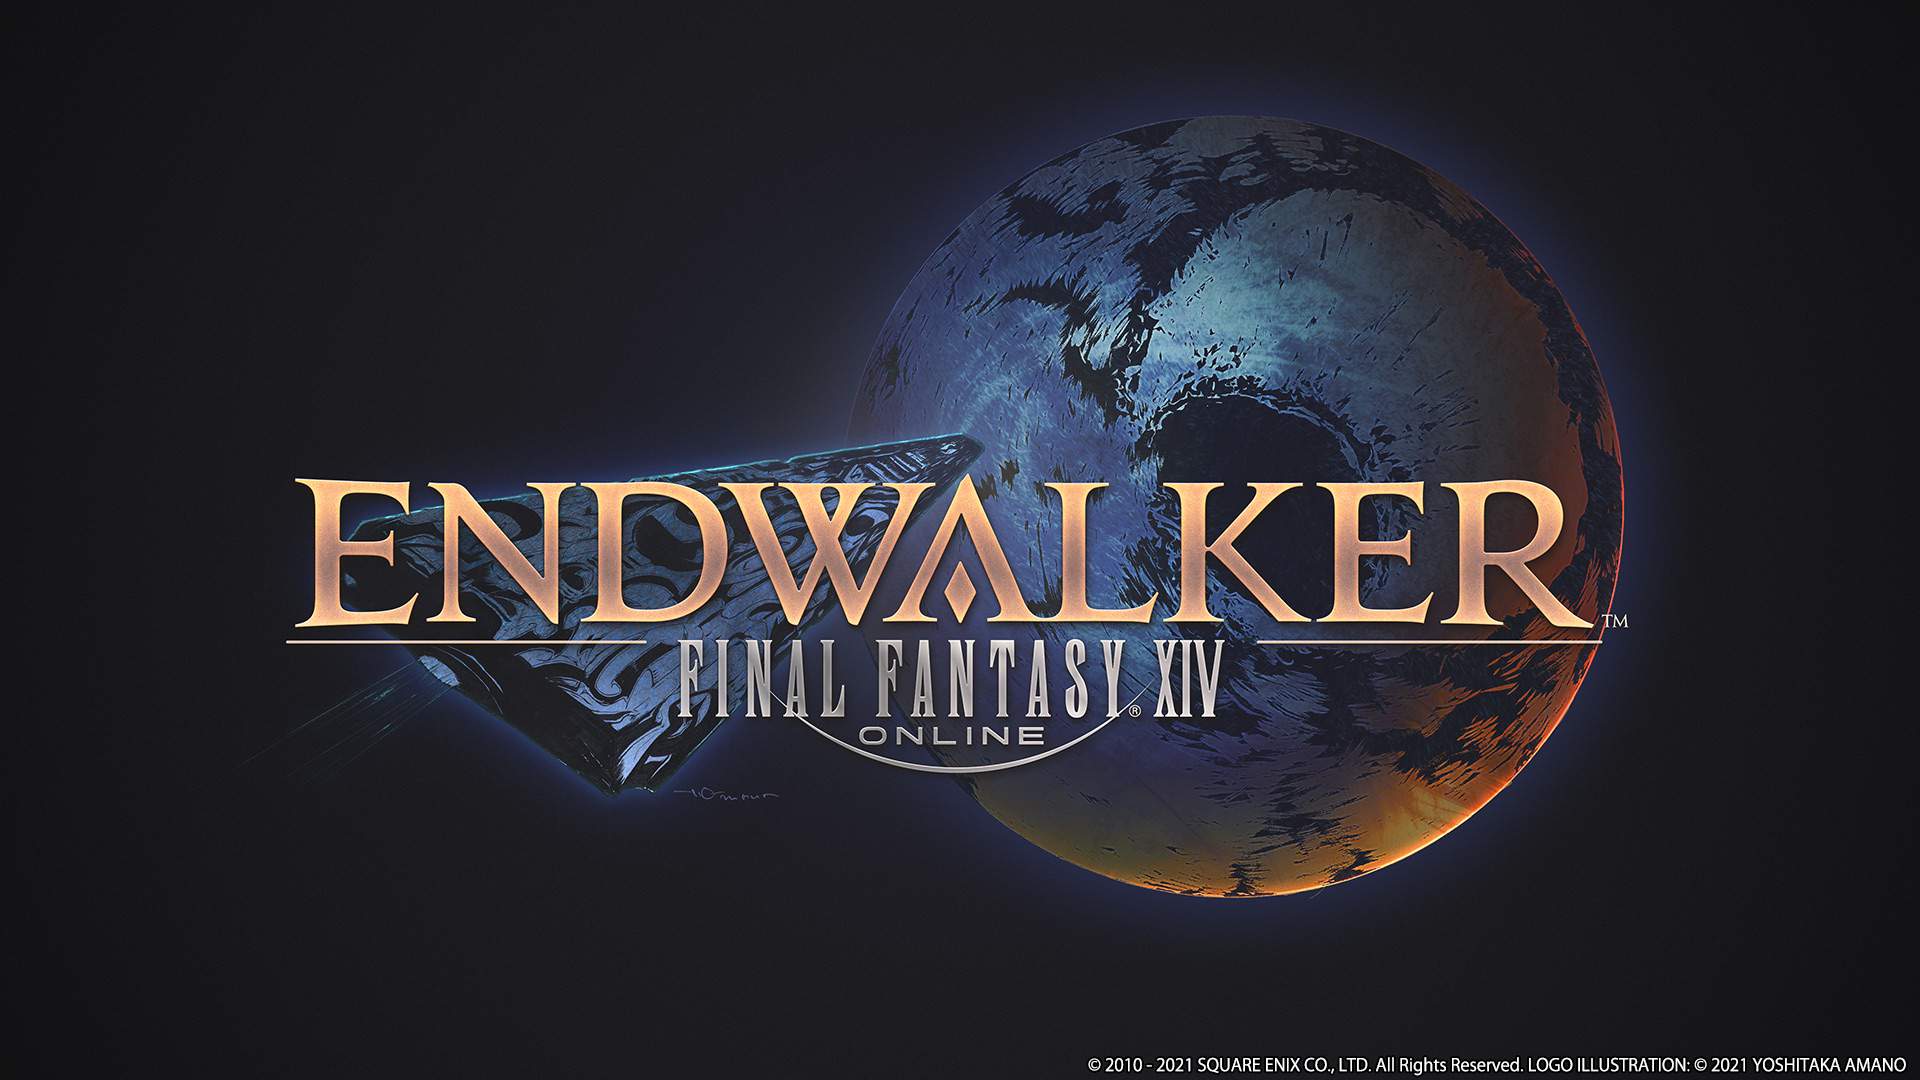 FINAL FANTASY XIV: Endwalker - everything you need to know